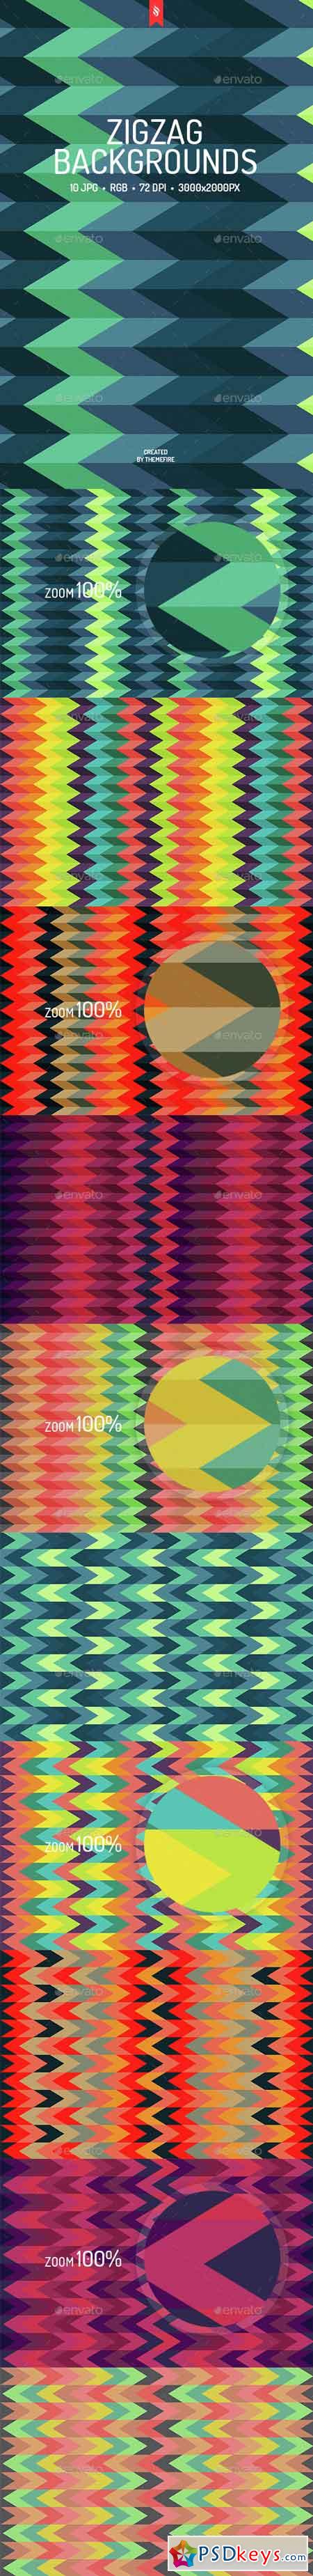 Abstract Zigzag Backgrounds 15284682